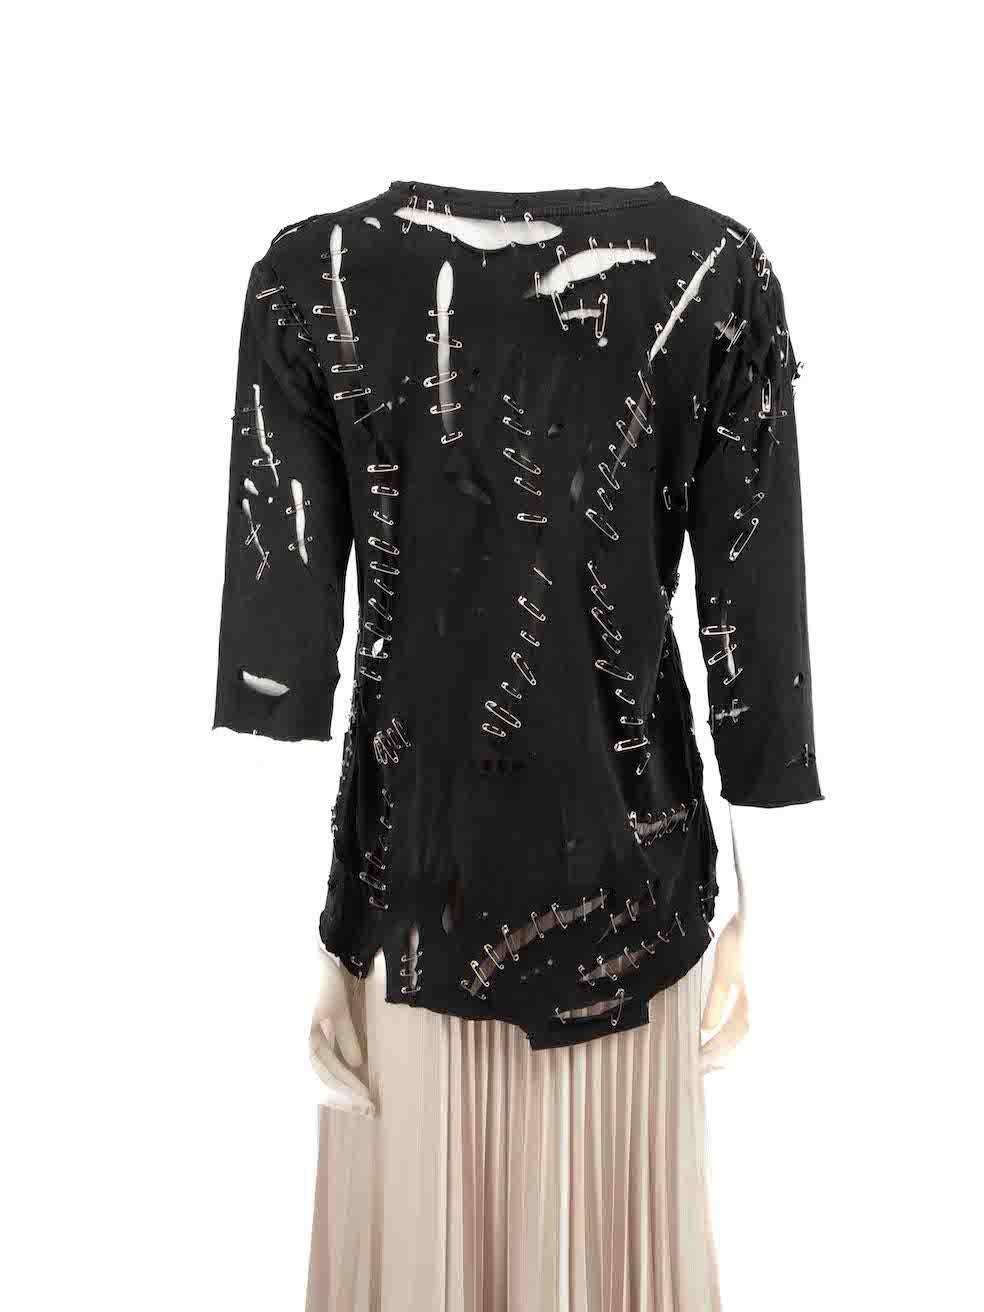 Balmain Black Distressed Safety Pins Top Size L In Good Condition For Sale In London, GB